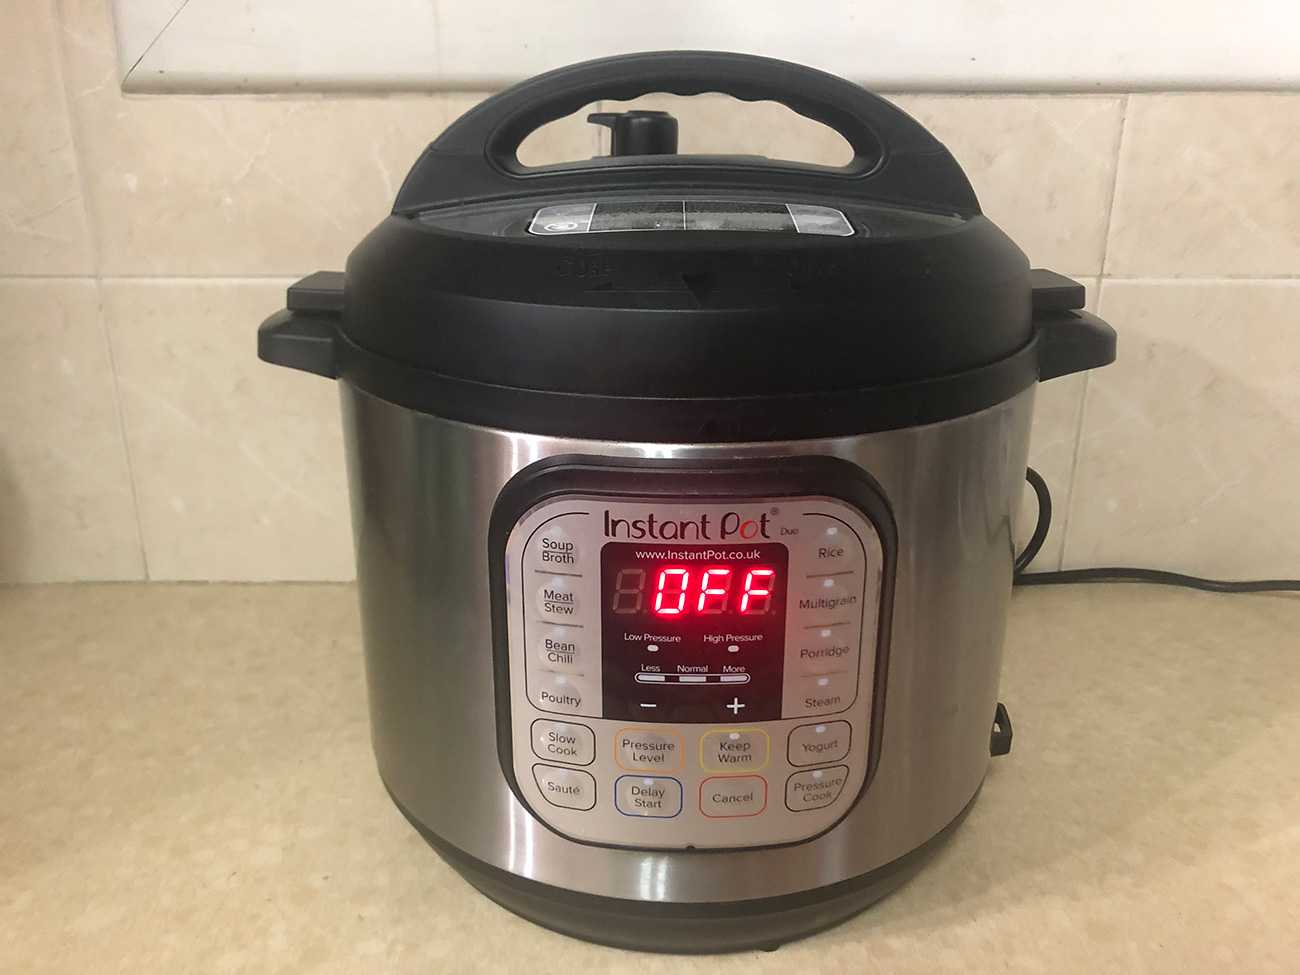 Update on Instant Pot as a Slow Cooker - DadCooksDinner